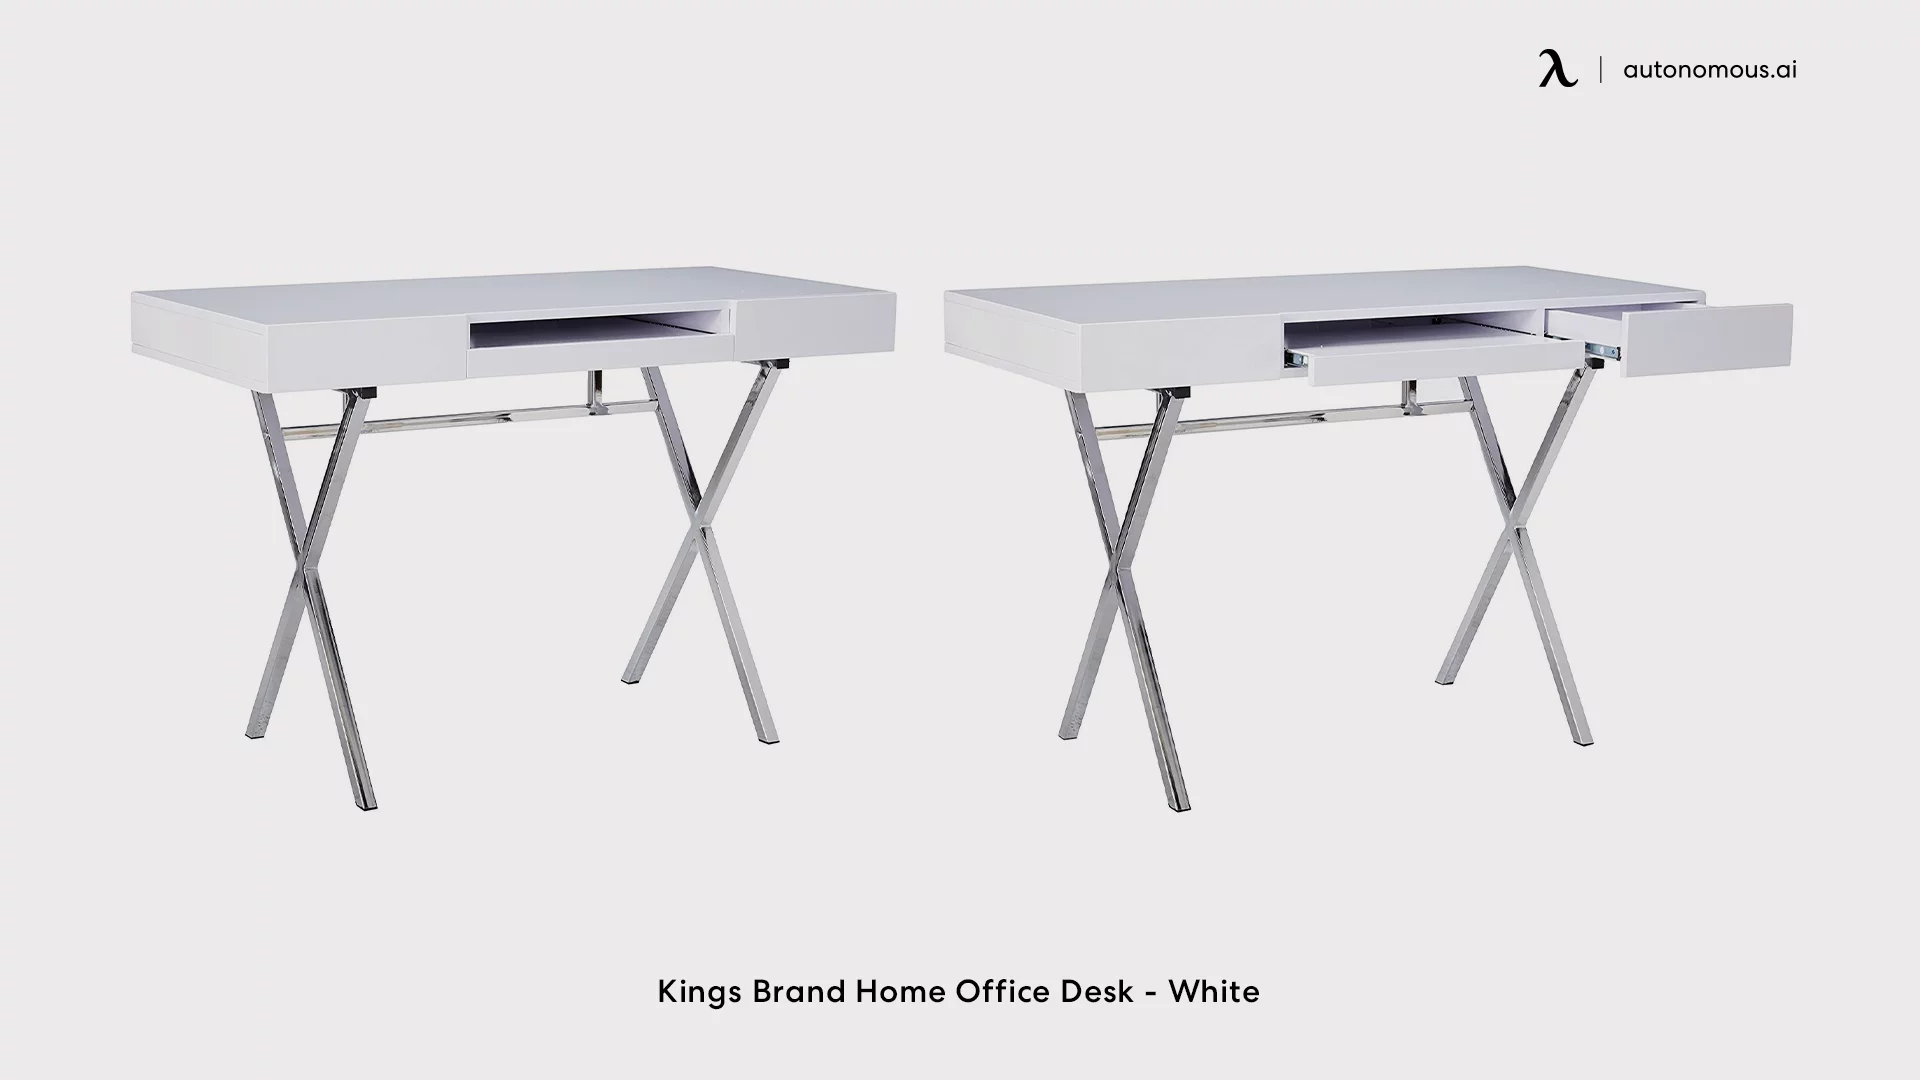 Kings Brand Home Office Desk - white desk with drawers